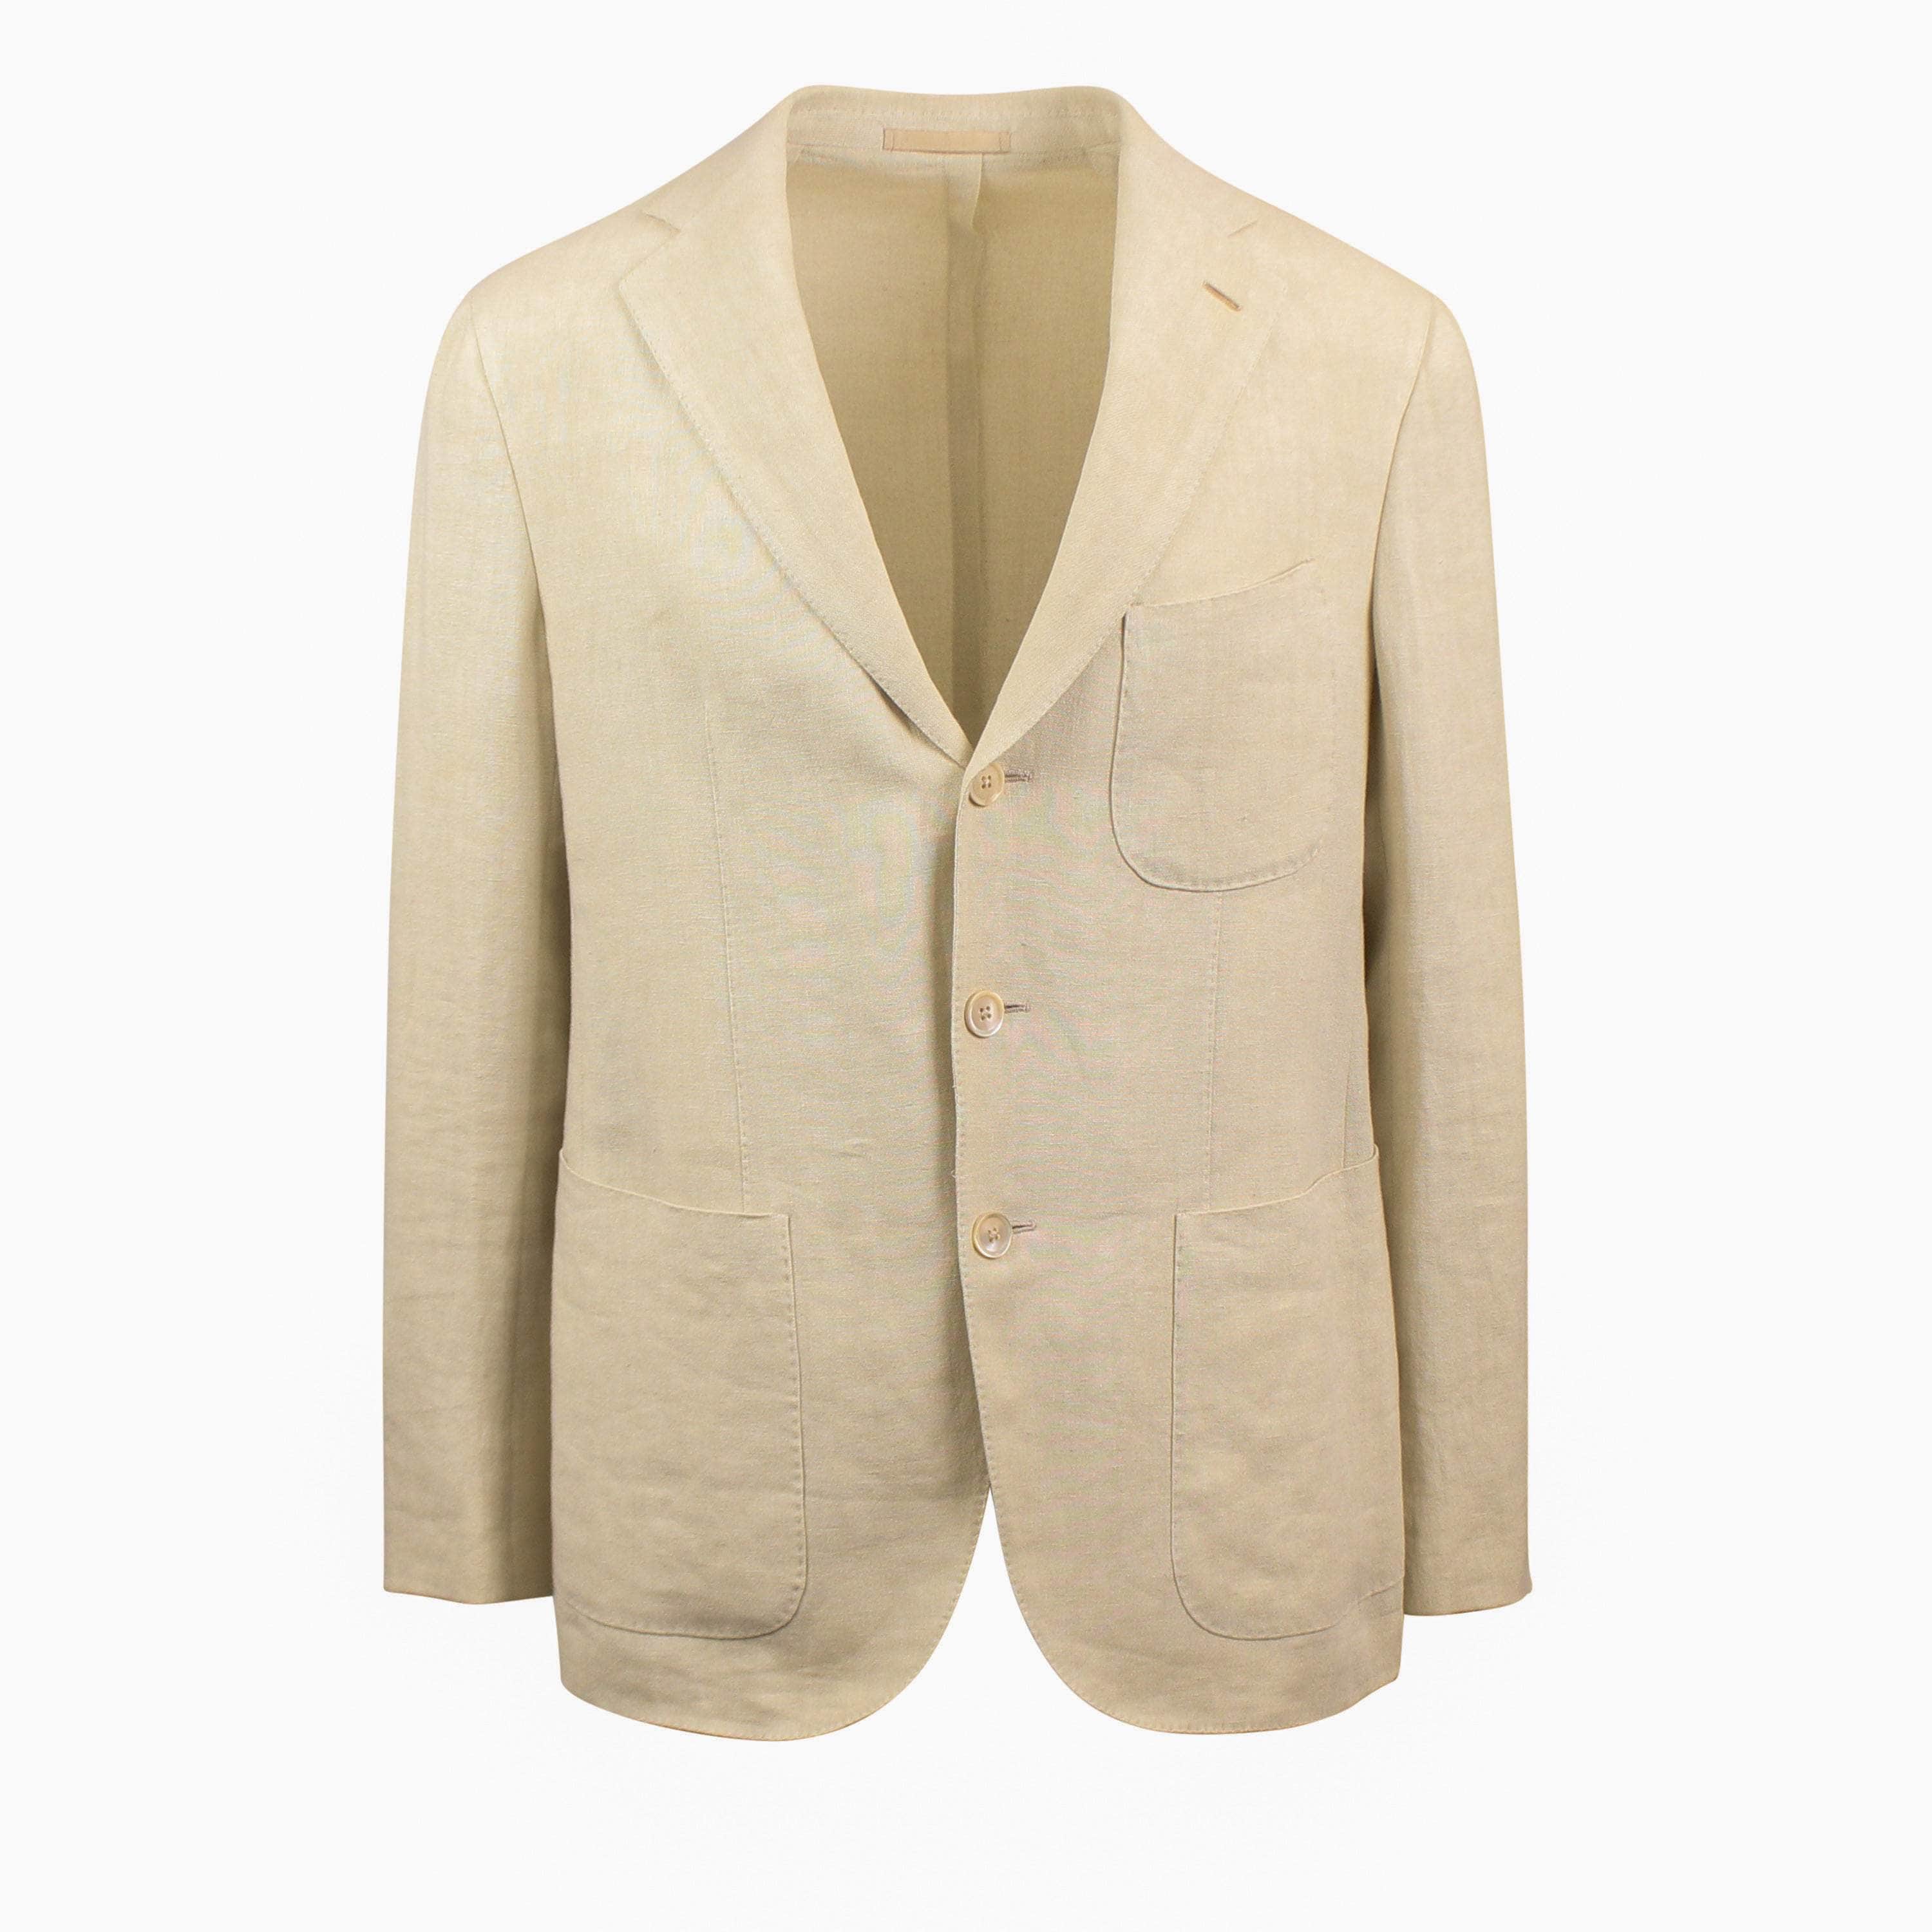 Caruso 500-750, caruso, channelenable-all, chicmi, couponcollection, main-clothing, shop375, size-50, Stadium Goods, stadiumgoods 50 Beige Linen Single Breasted Suit 8R CRS-XTPS-0147/50 CRS-XTPS-0147/50